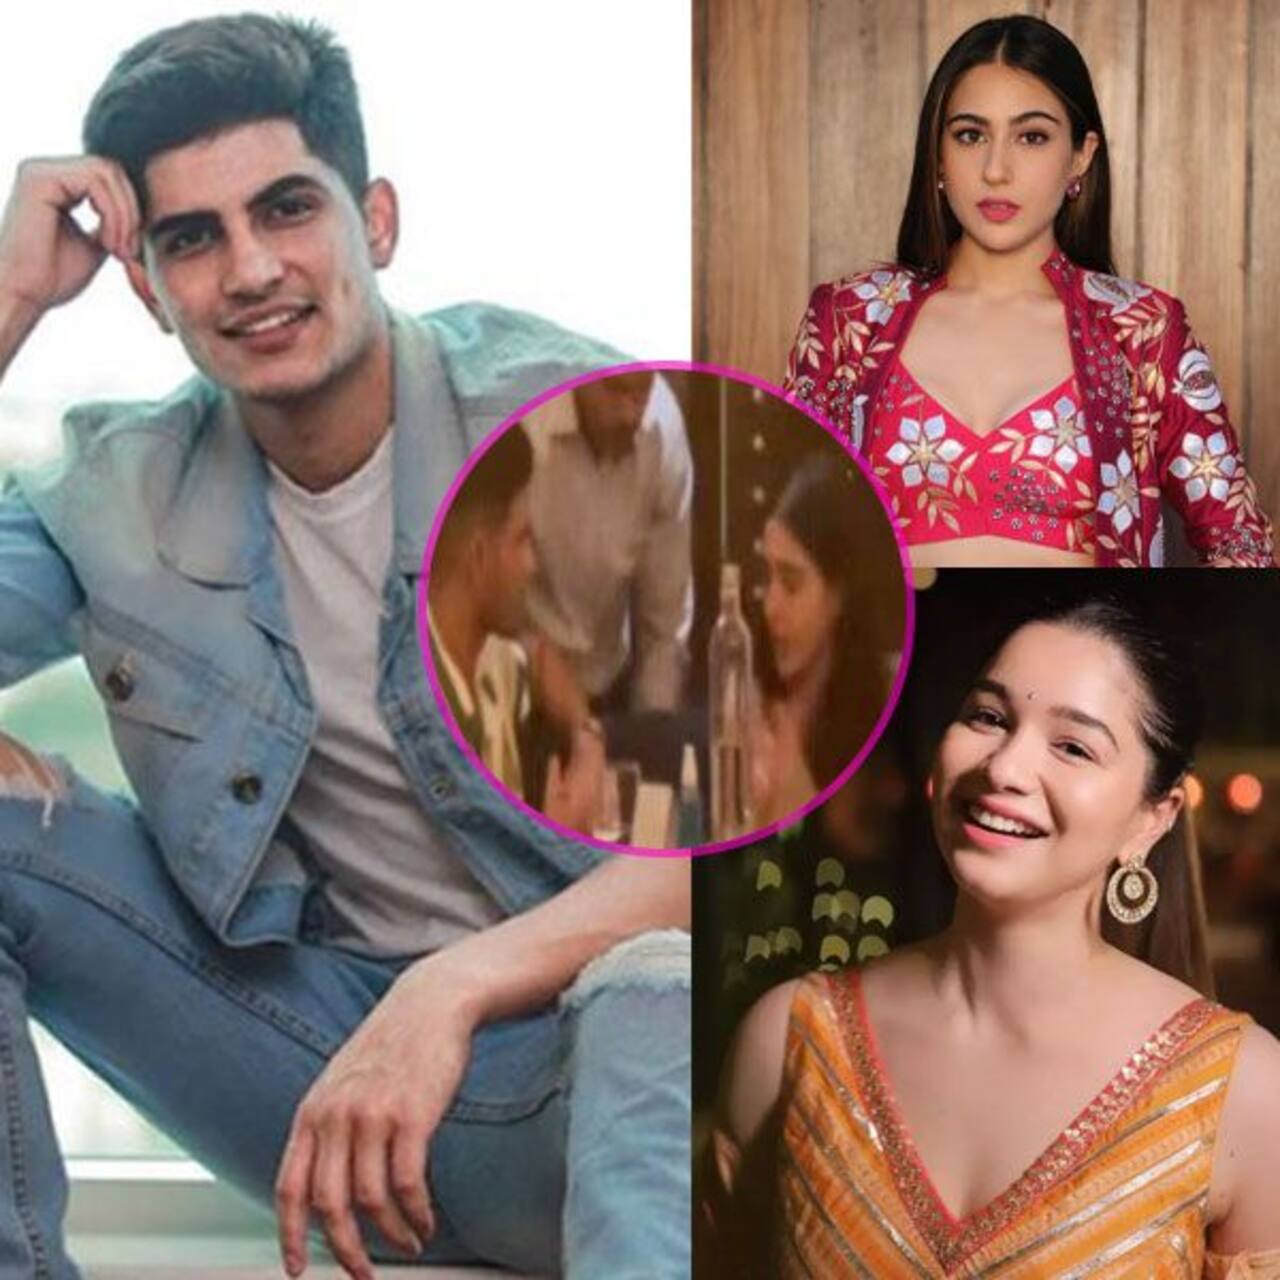 Is Shubman Gill dating Sara Ali Khan after his break up with Sara